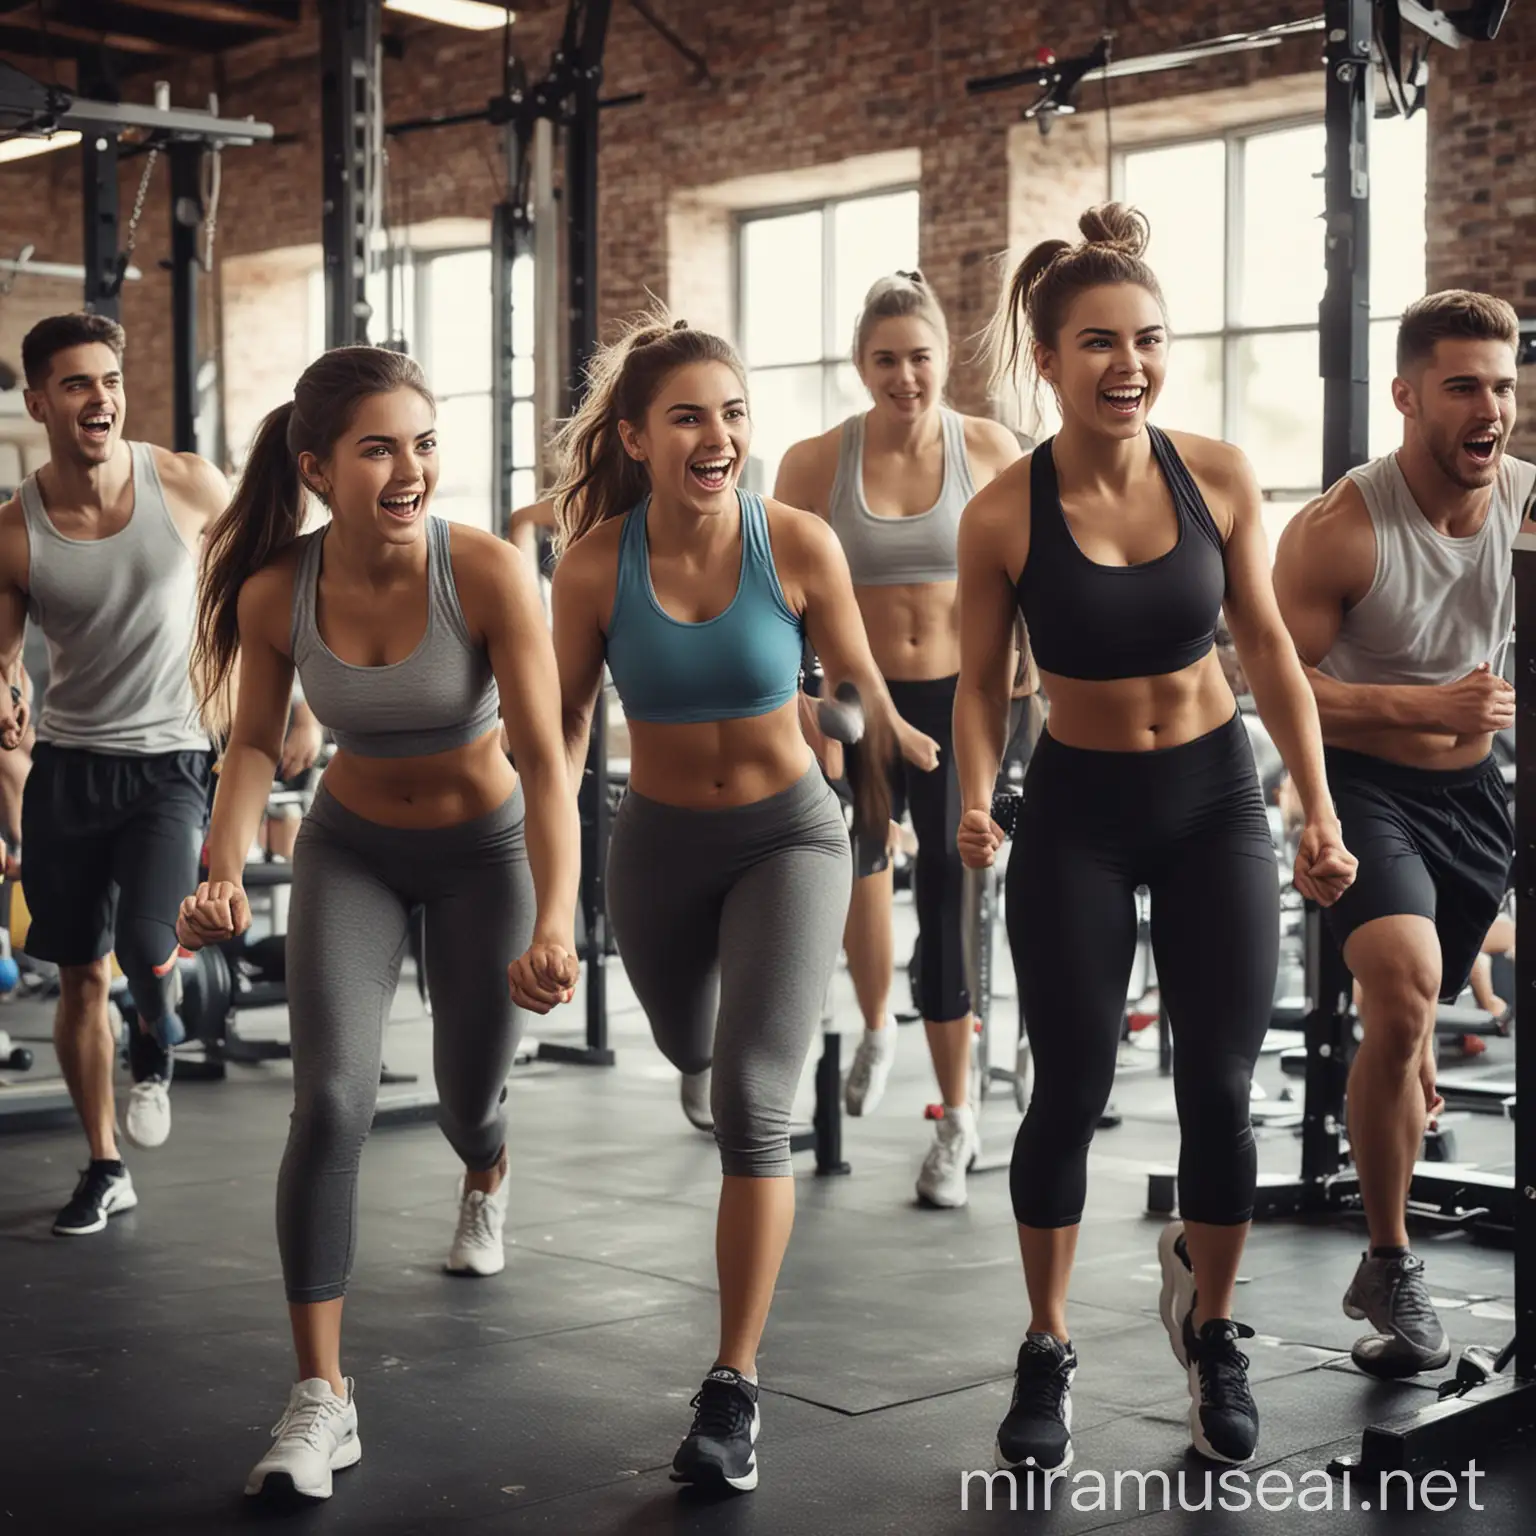 Energetic College Friends Exercising Together in the Gym